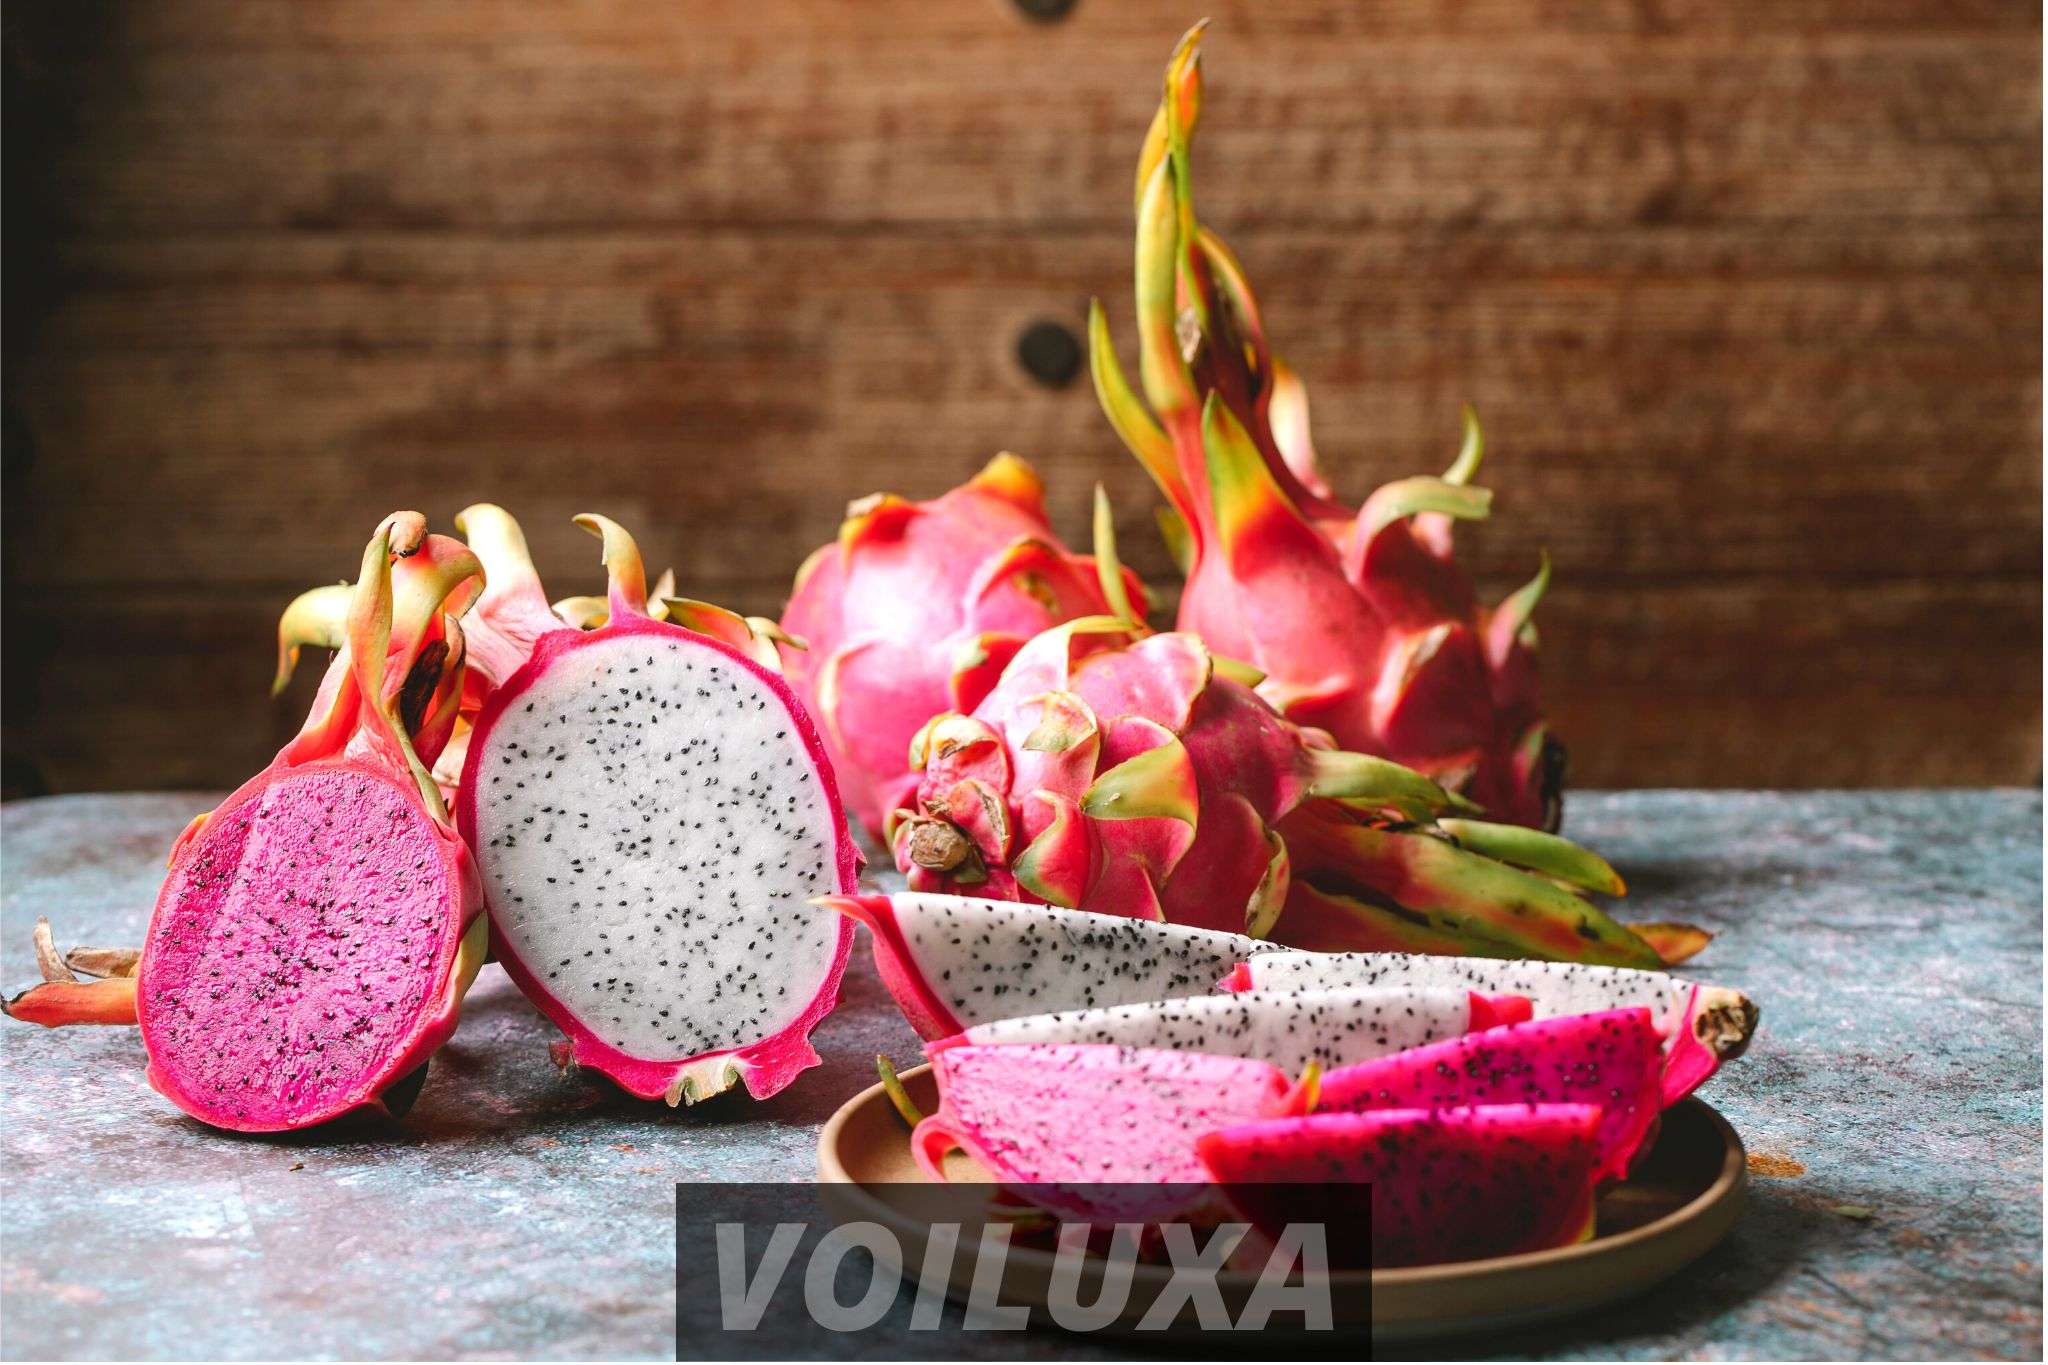 Why Is Dragon Fruit So Expensive?